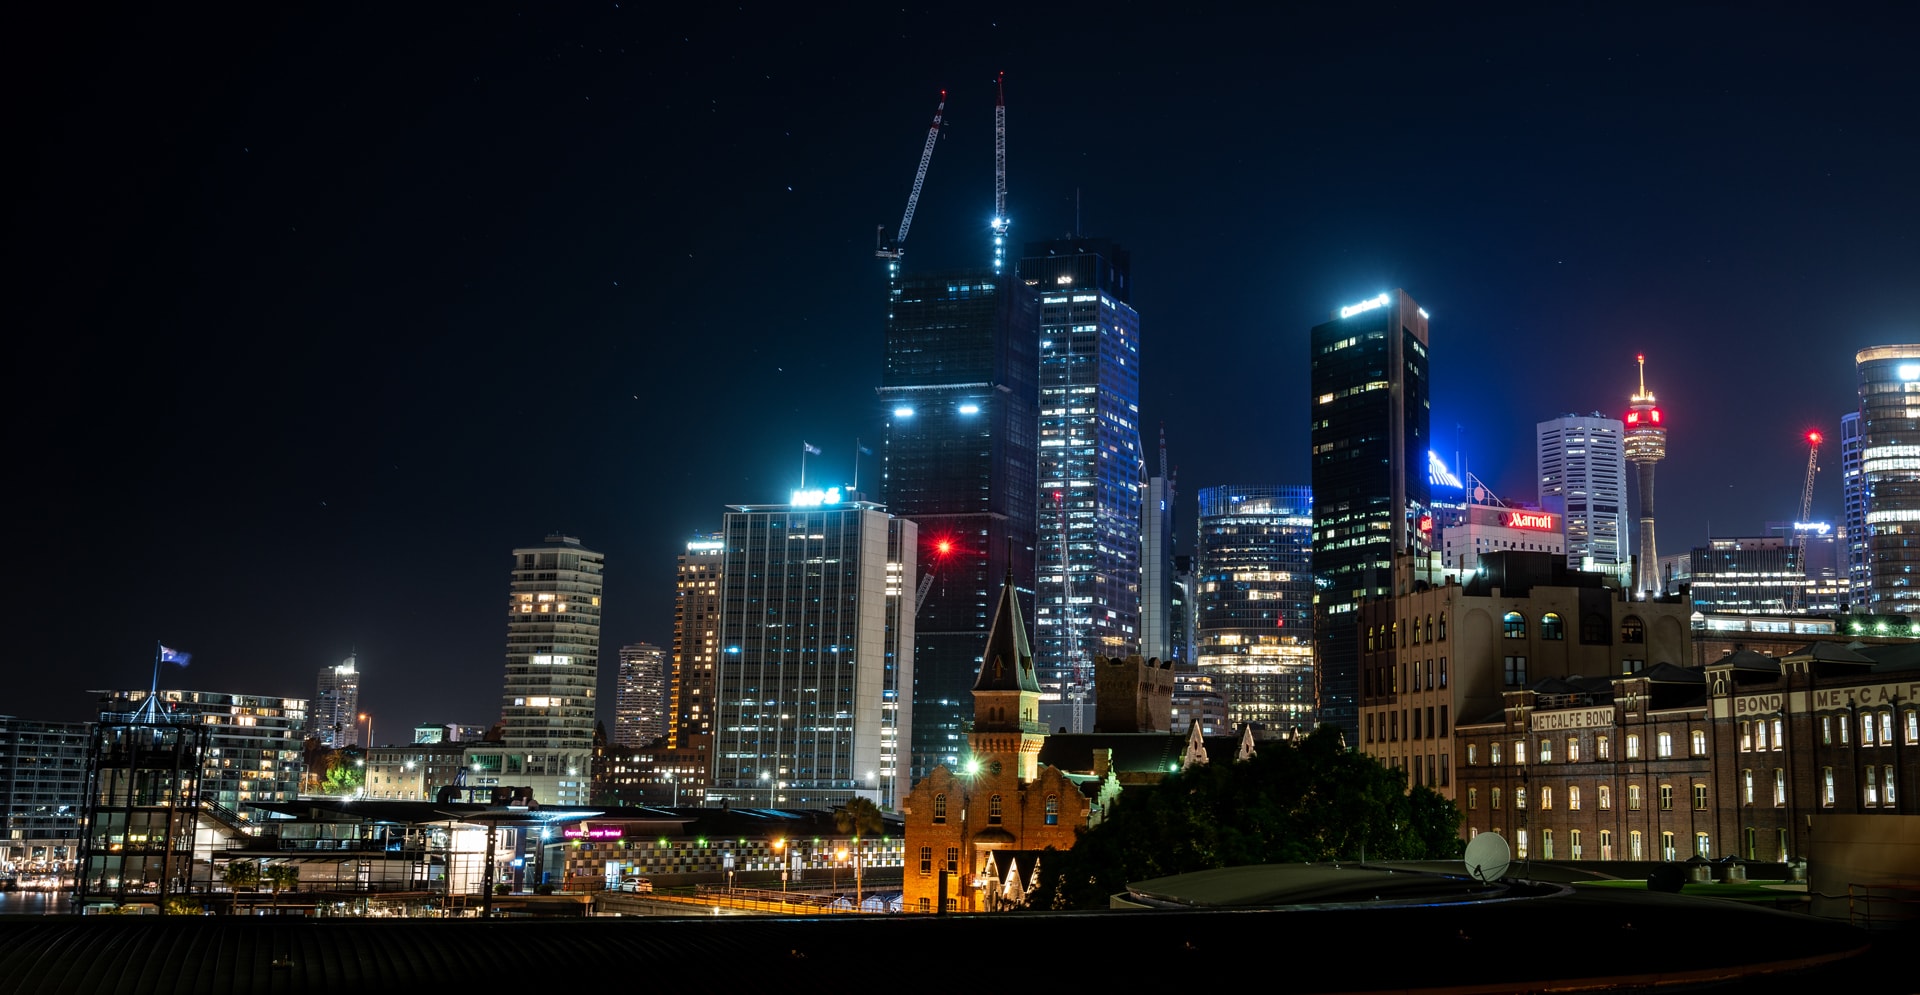 A view of Sydney office buildings at night